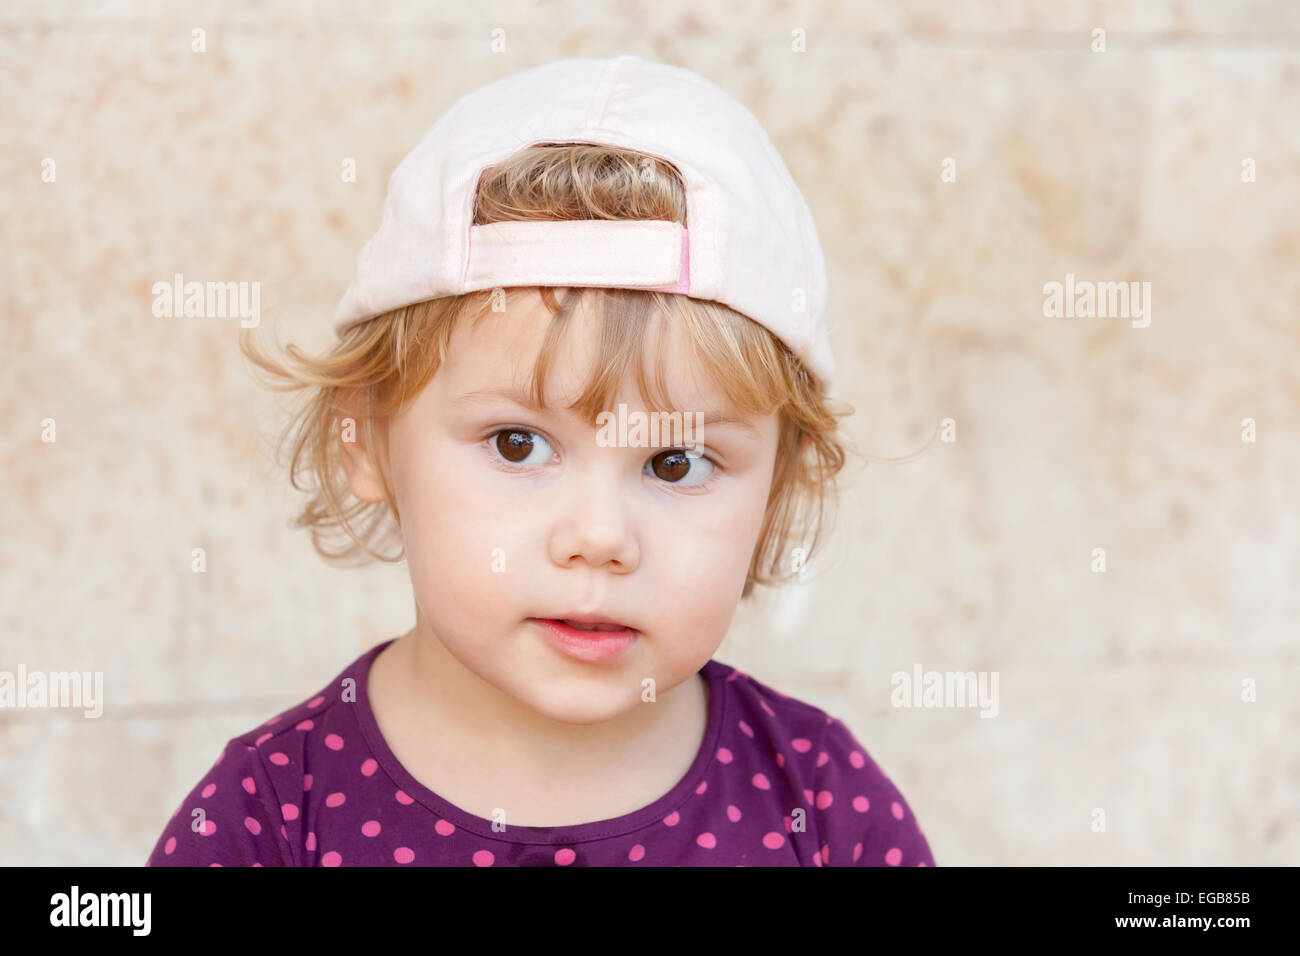 Outdoor closeup portrait of curious cute Caucasian blond baby girl in white baseball cap Stock Photo